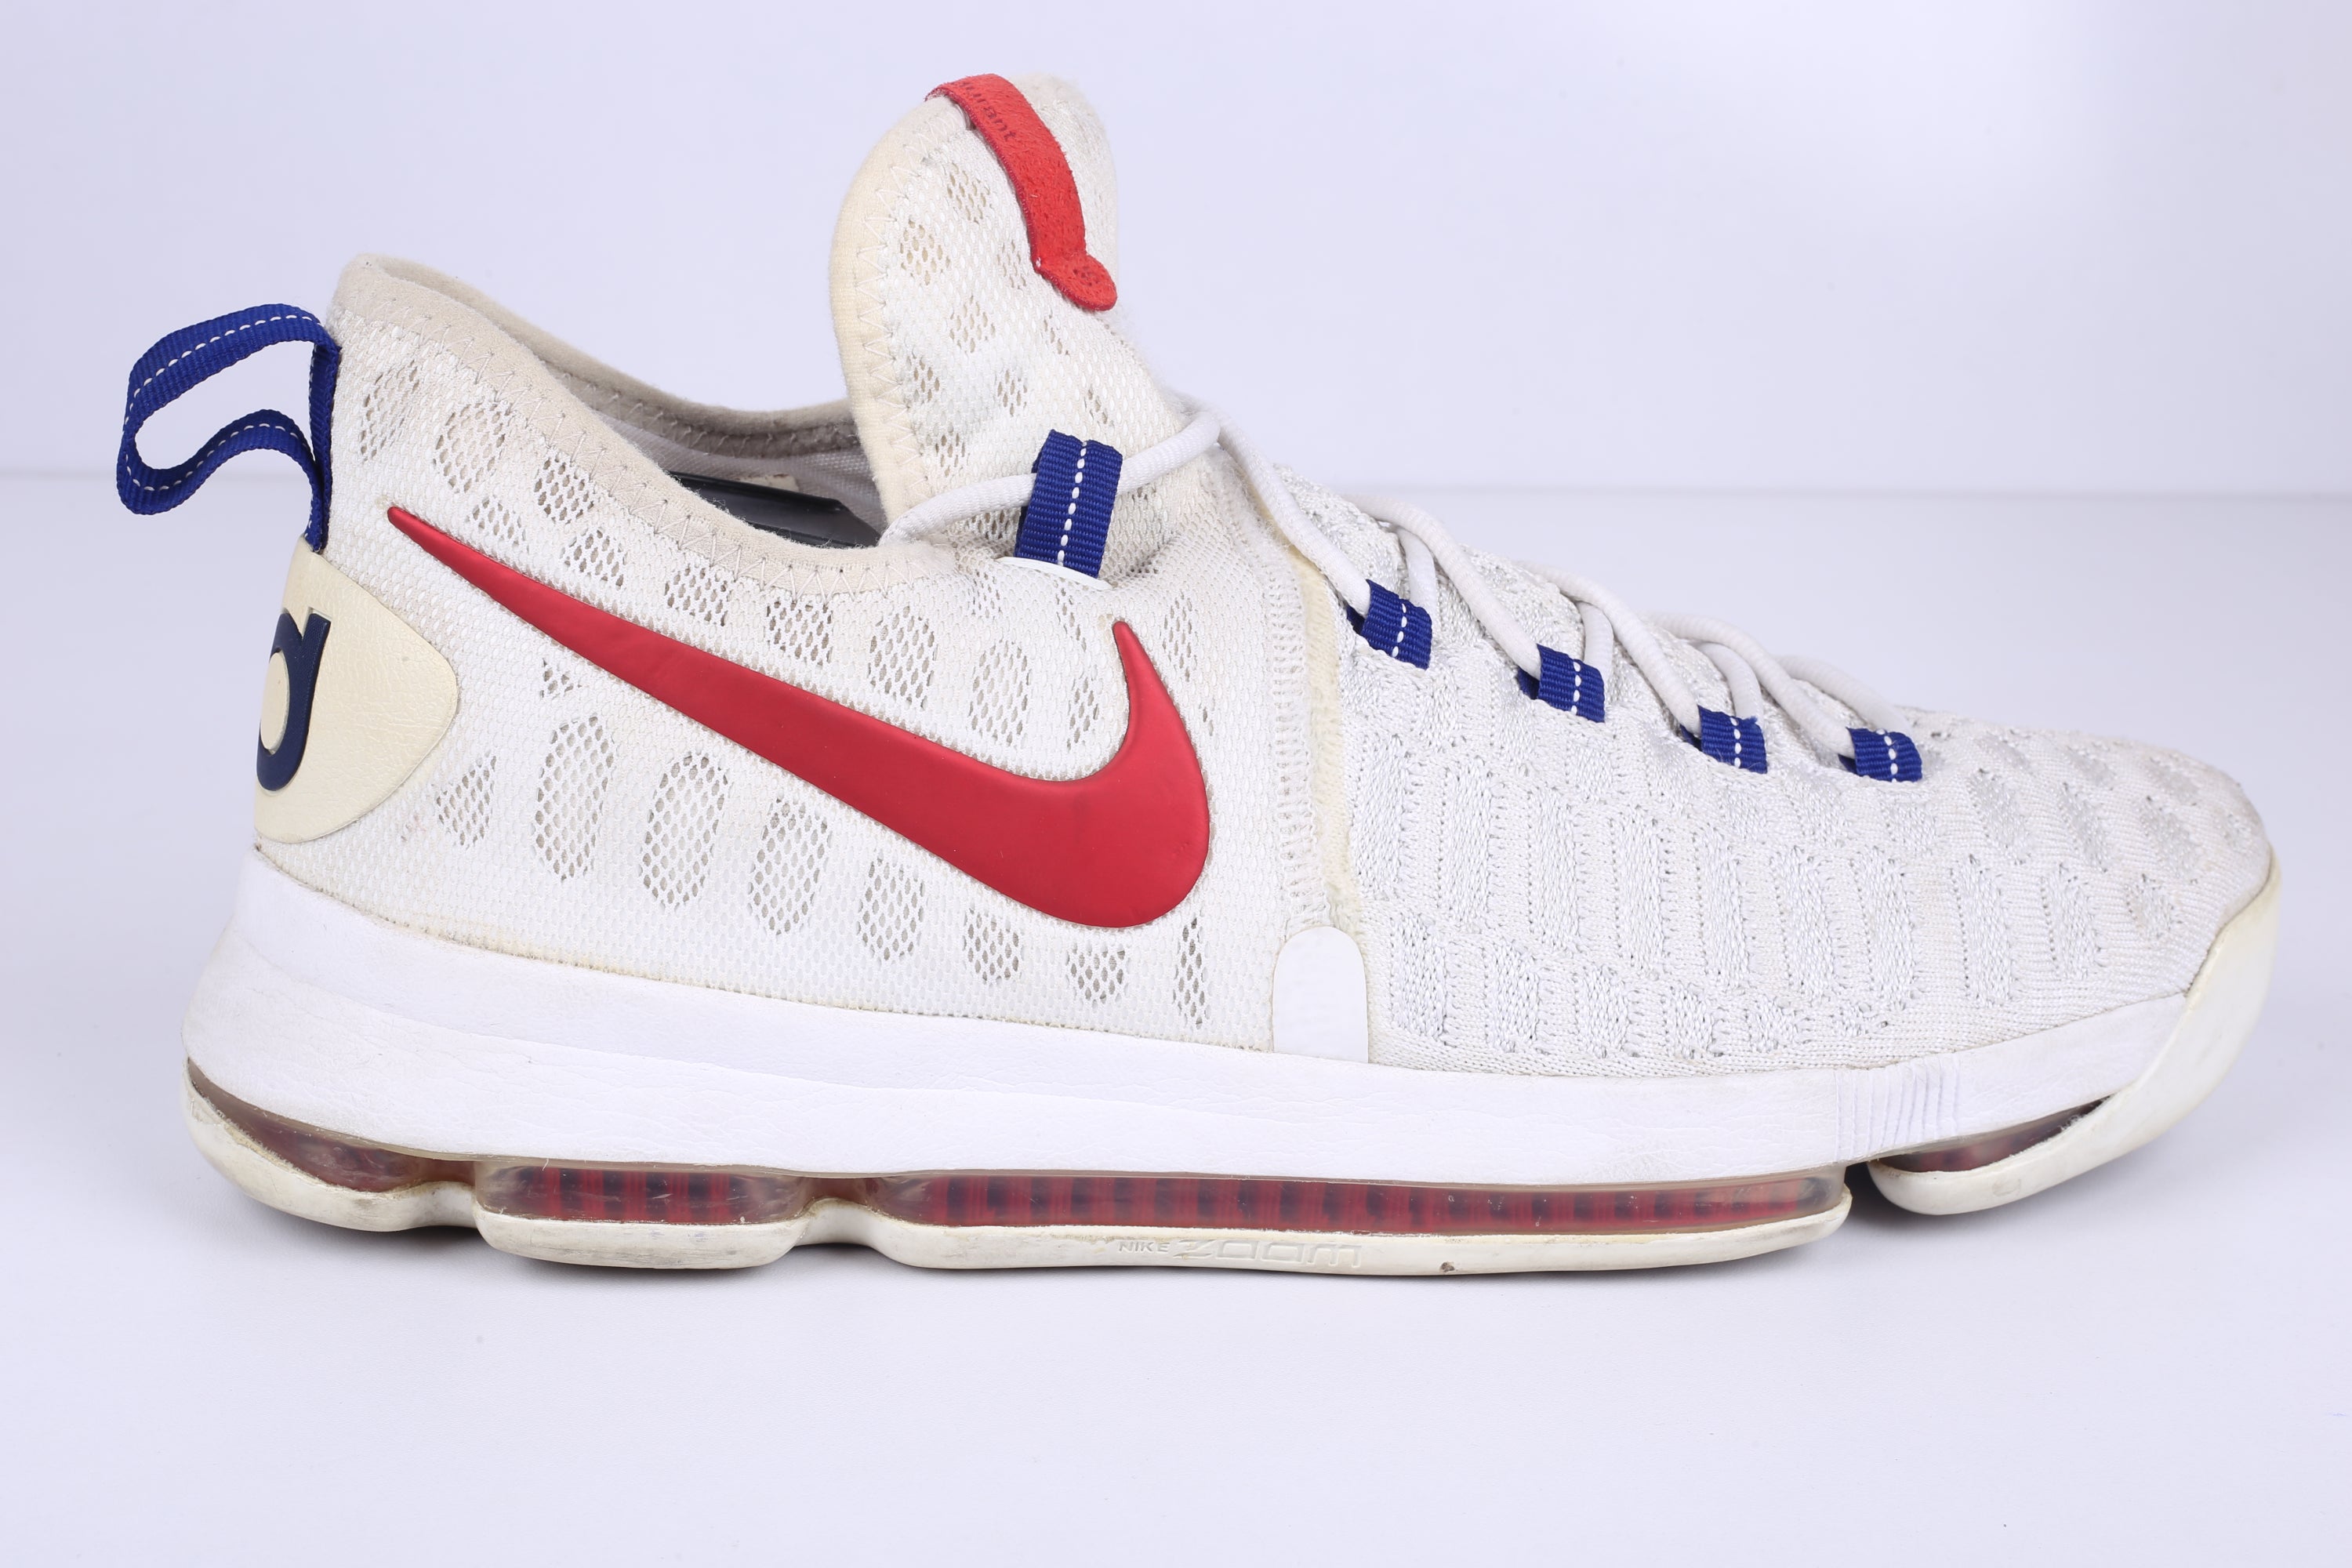 Nike Kd 9 Sneaker -(Condition Excellent)